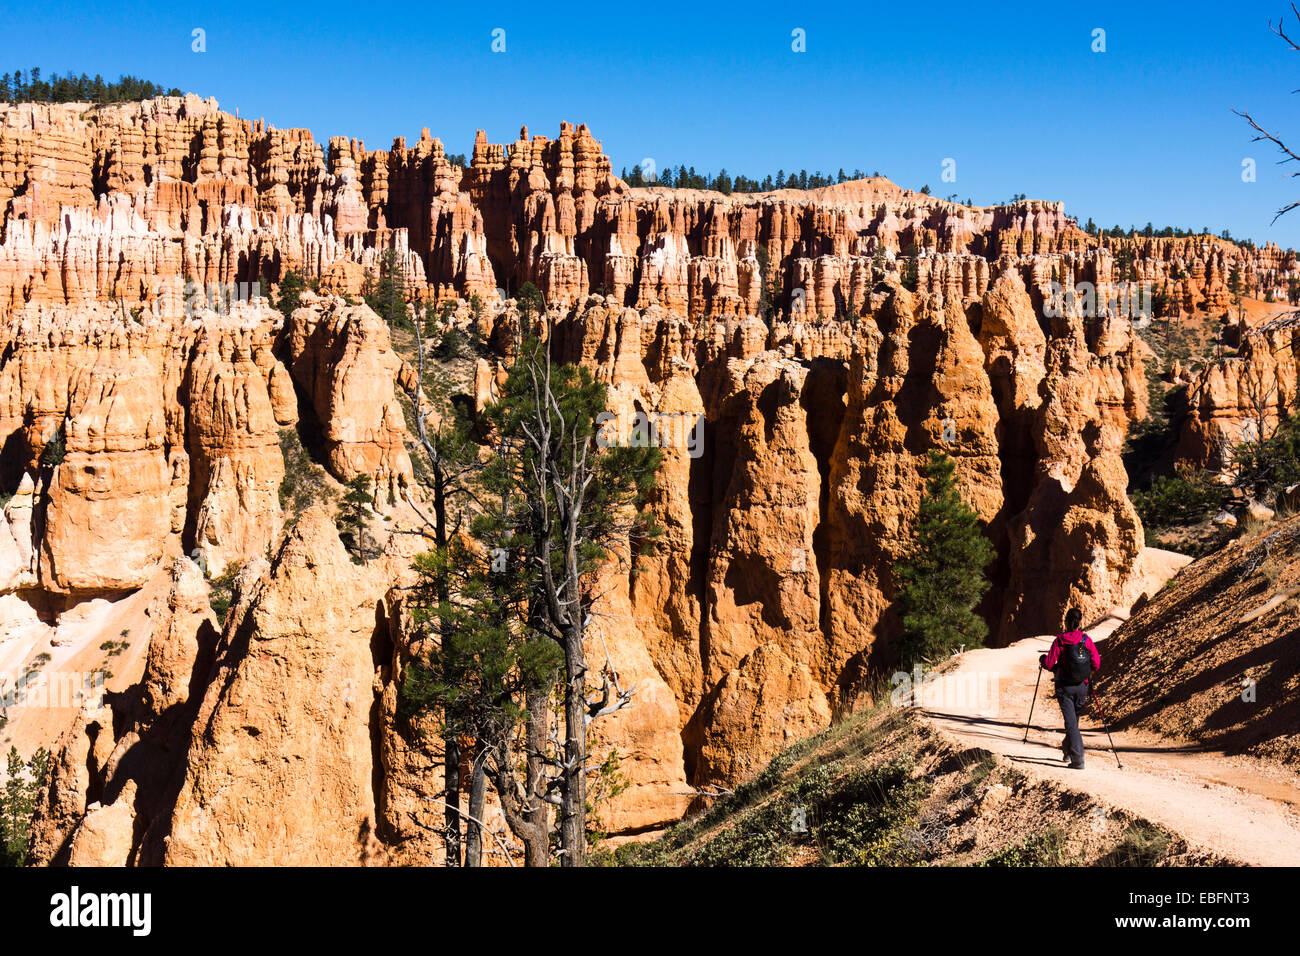 Female hiker on the Peekaboo Loop Trail, Bryce Amphitheater hoodoos in the background. Bryce Canyon National Park, Utah, USA. Stock Photo